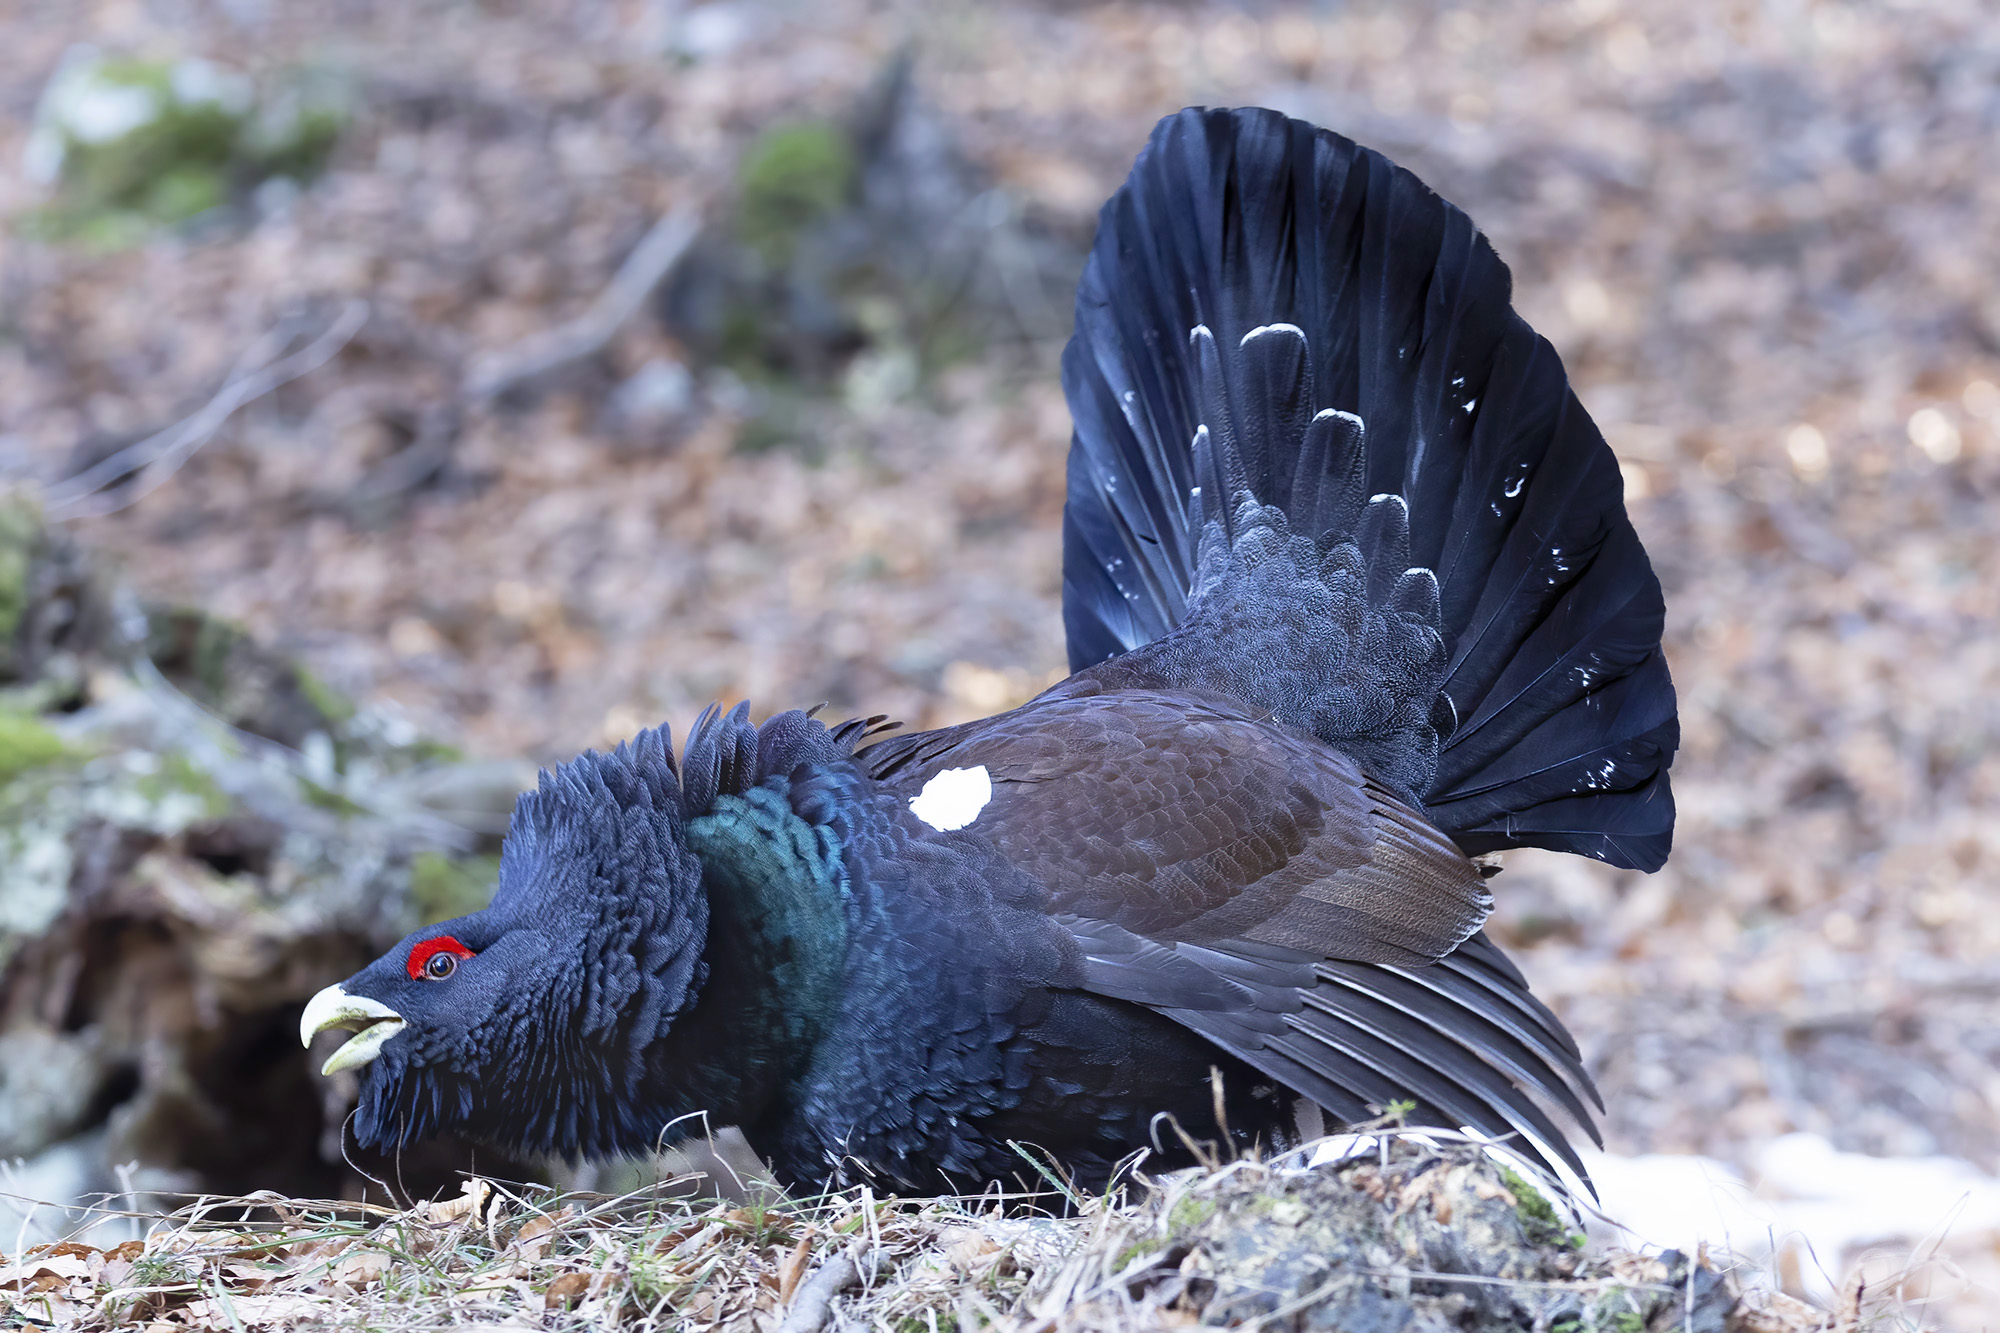 stretching in the undergrowth, capercaillie...